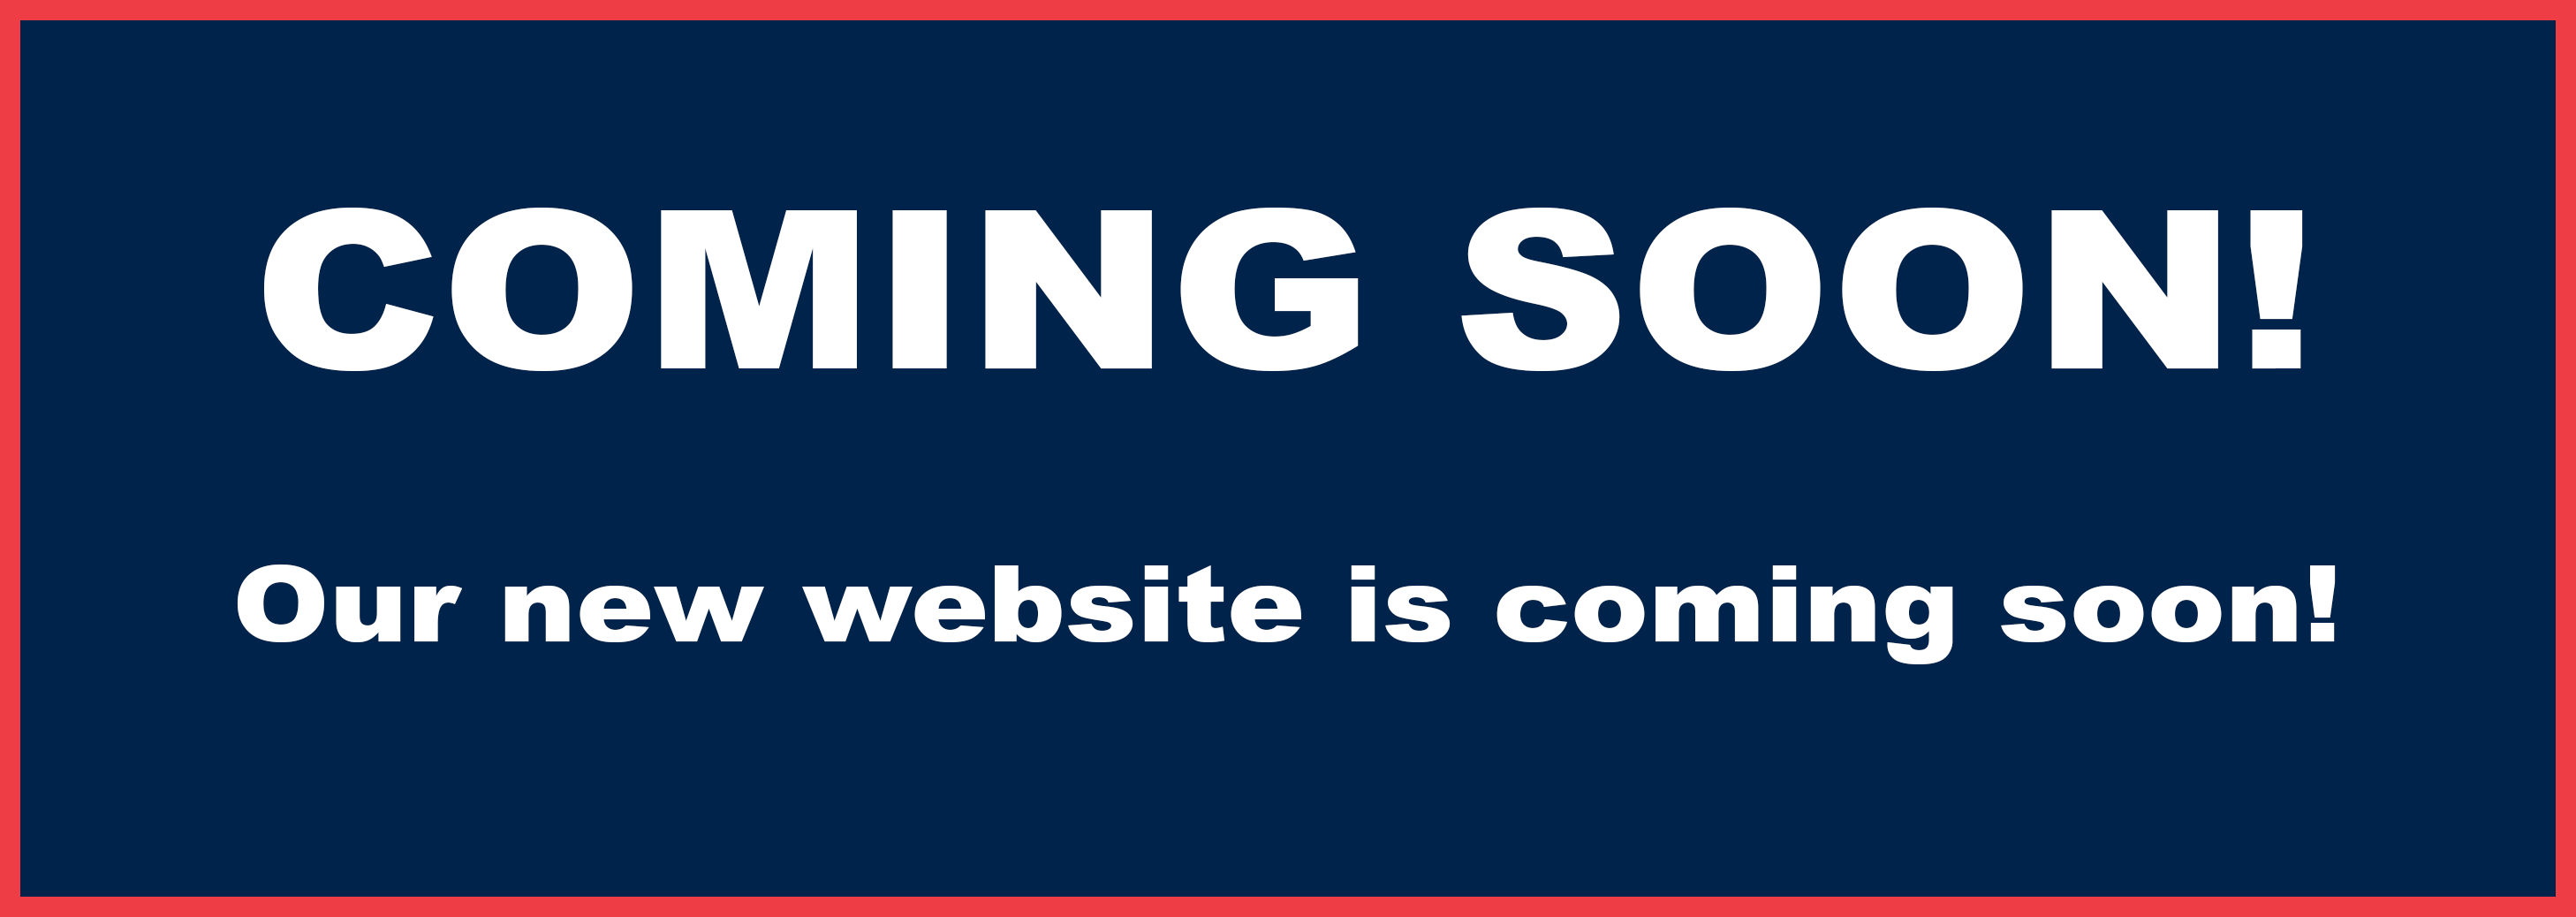 Our new website is coming soon!